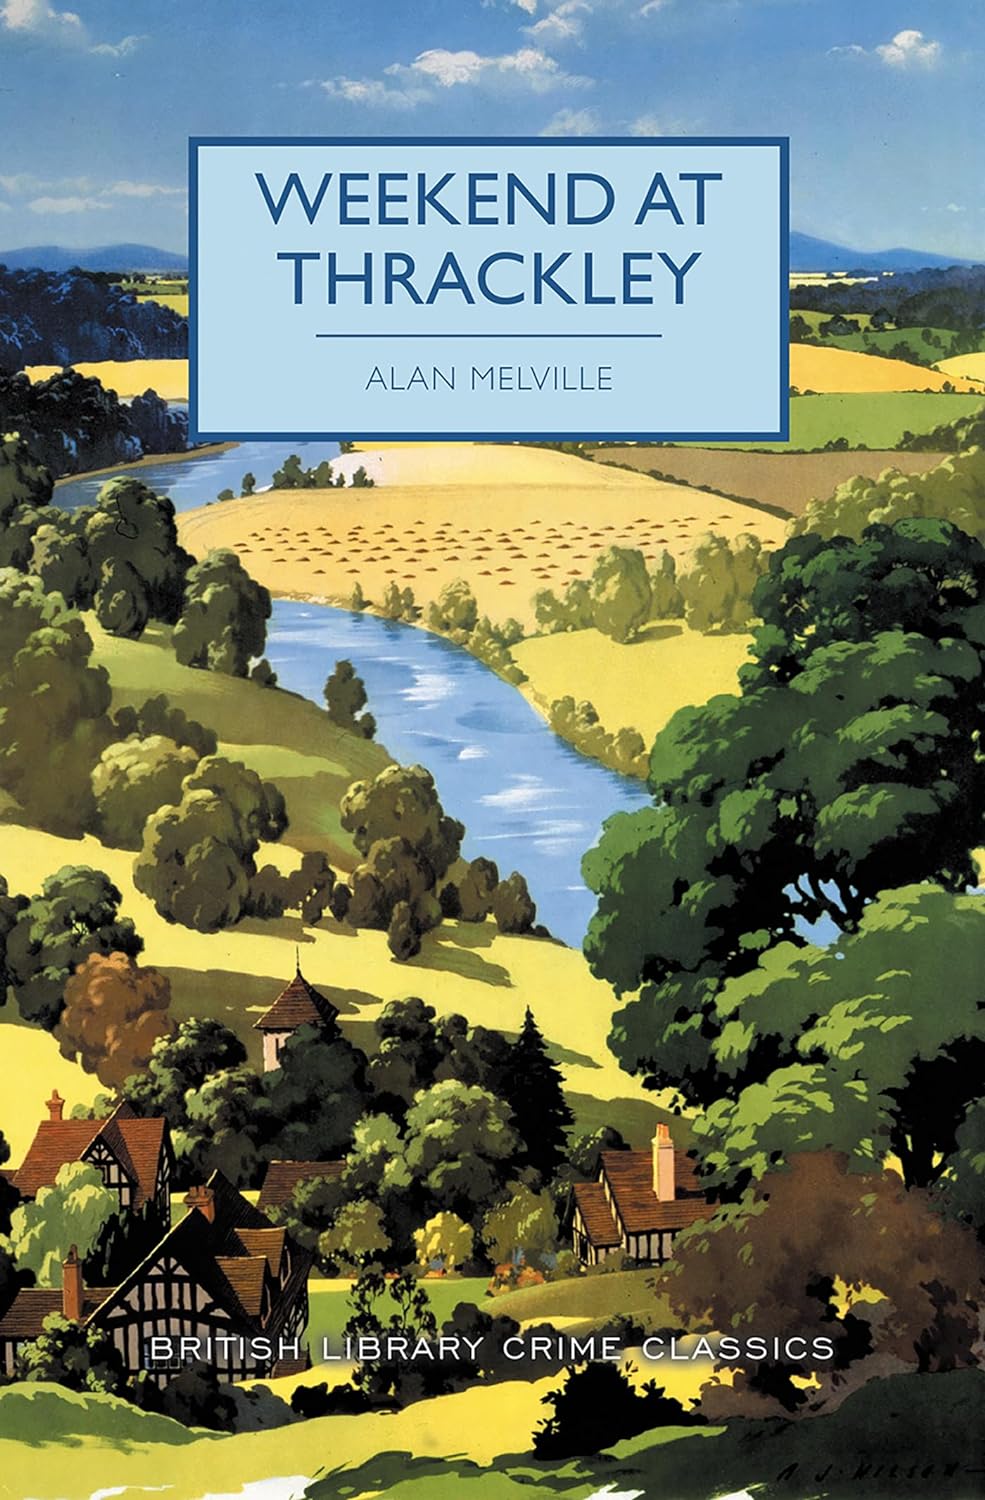 Weekend at Thrackley - Alan Melville